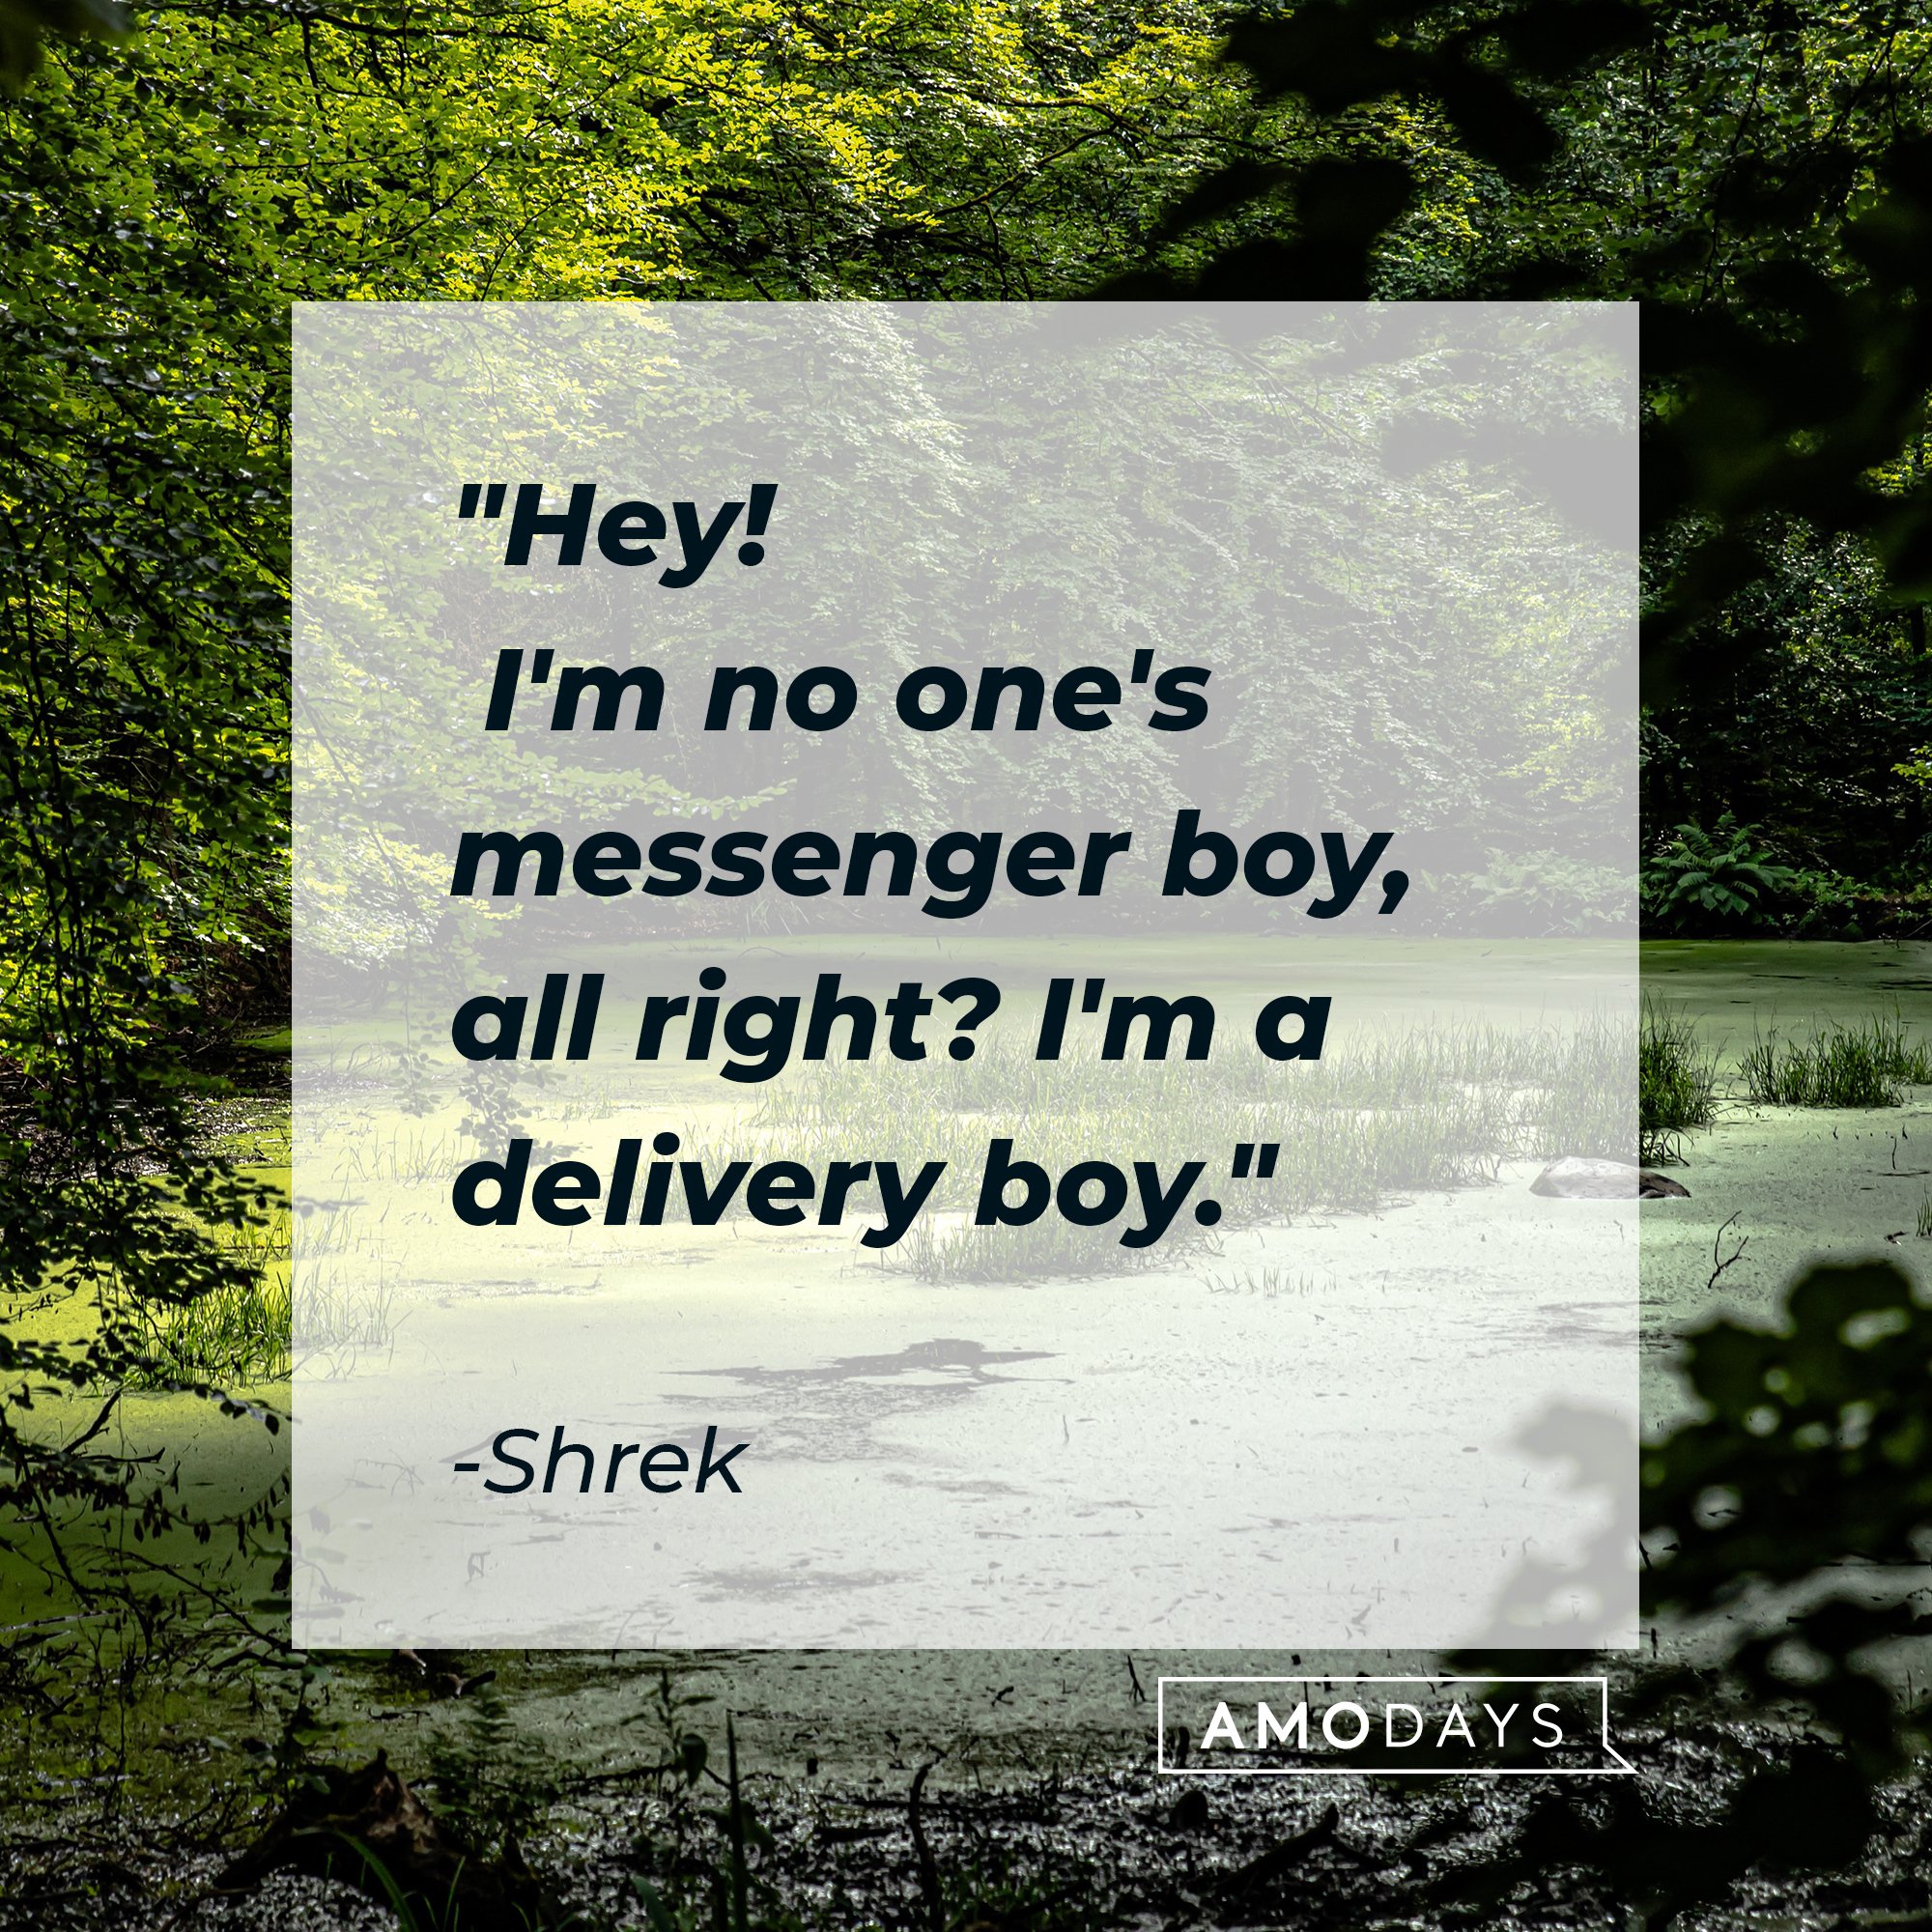 Shrek's quote: "Hey! I'm no one's messenger boy, all right? I'm a delivery boy." | Images: AmoDays